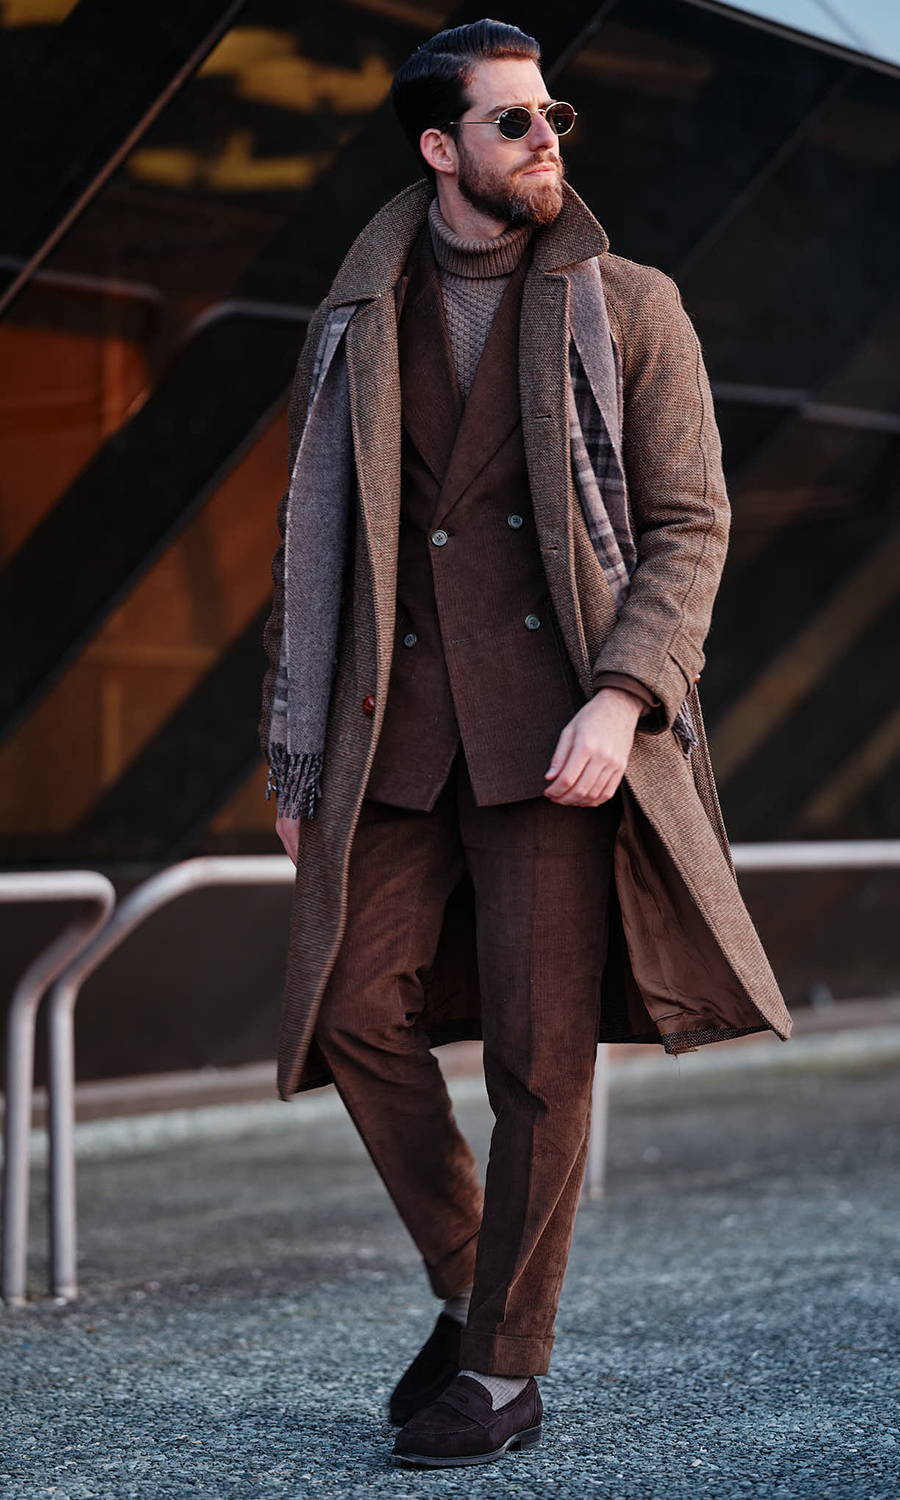 Brown corduroy suit, brown overcoat, brown turtleneck, and dark brown suede loafers outfit